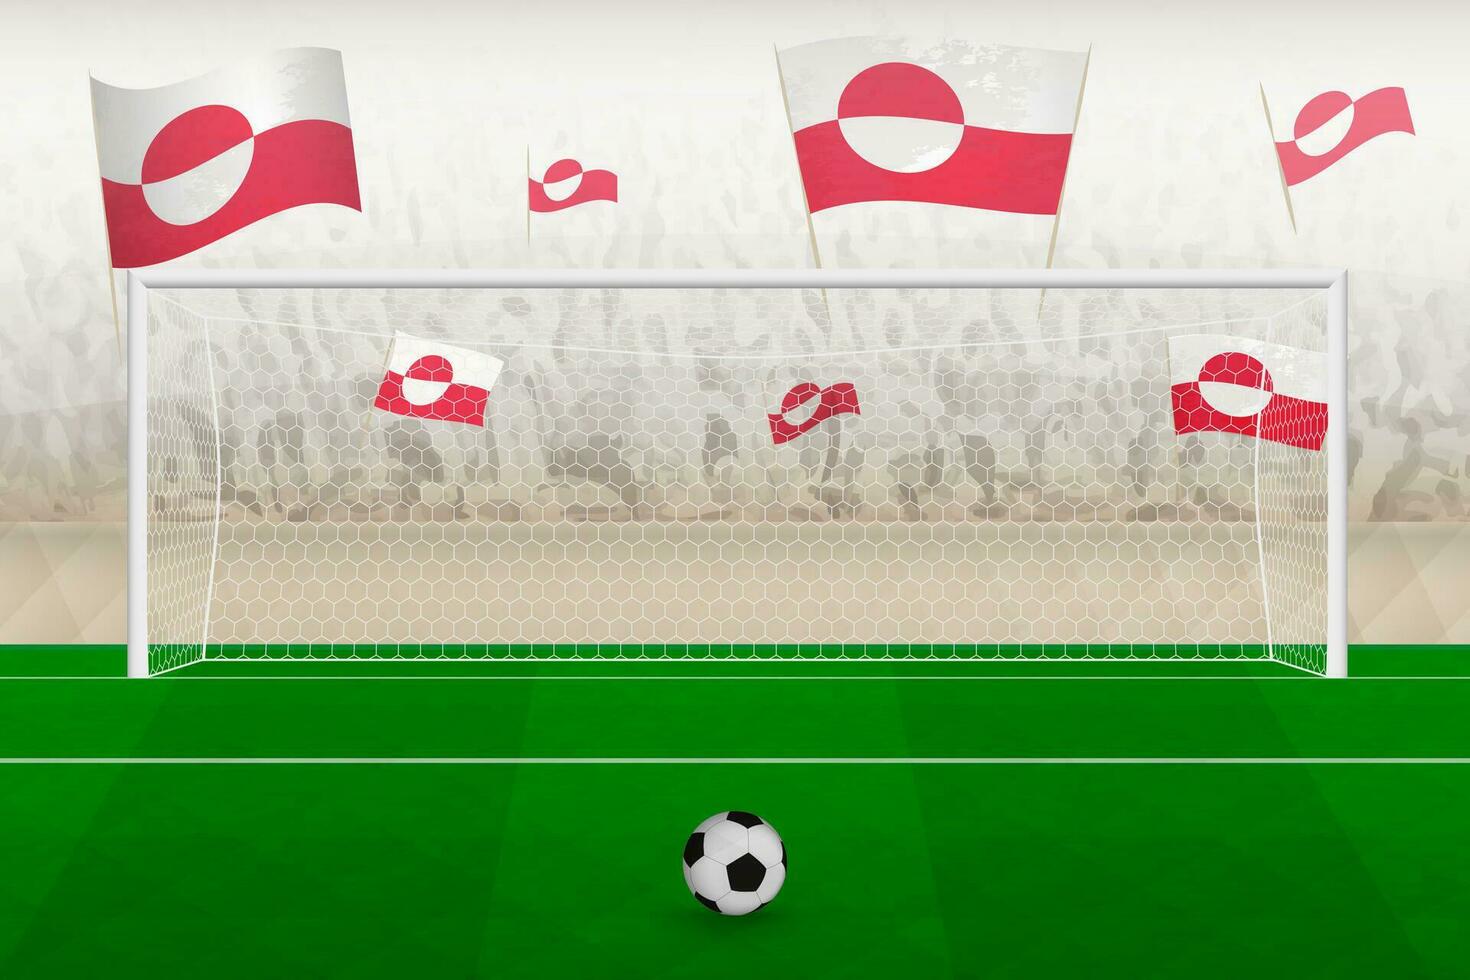 Greenland football team fans with flags of Greenland cheering on stadium, penalty kick concept in a soccer match. vector